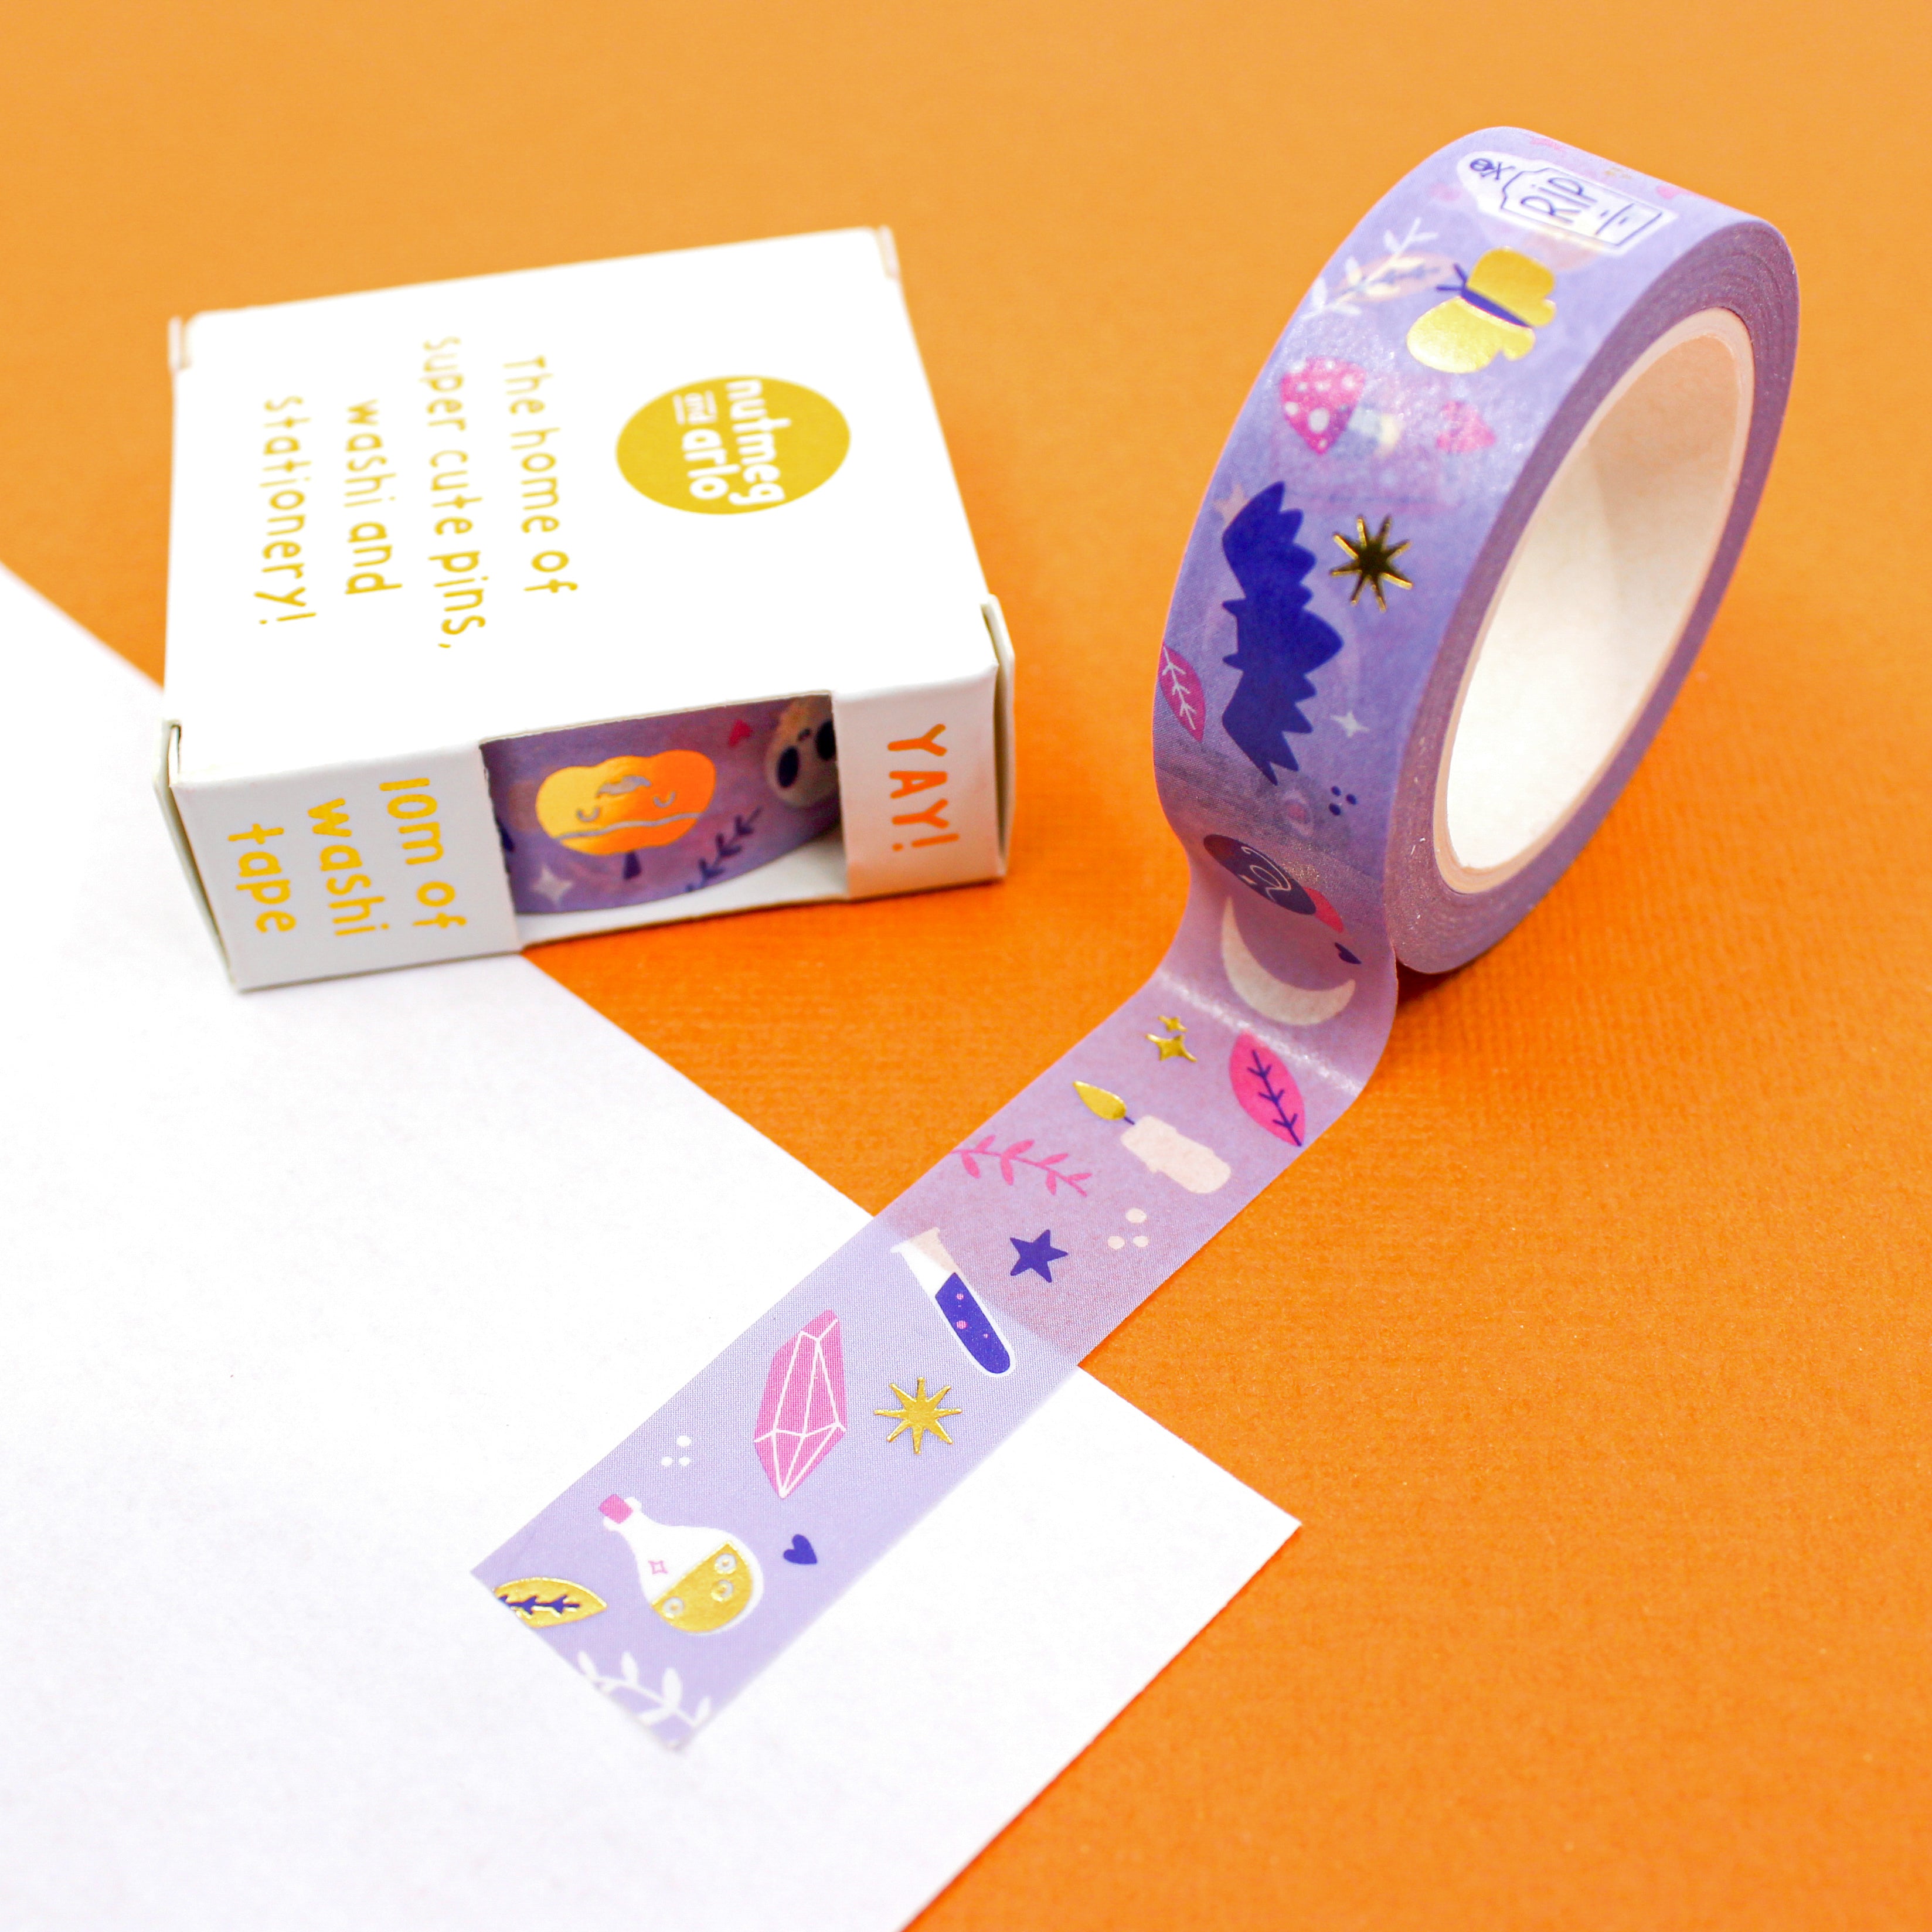 This is a spooky characters mystical Halloween view themed washi tape from Nutmeg and Arlo and available at BBB Supplies Craft Shop